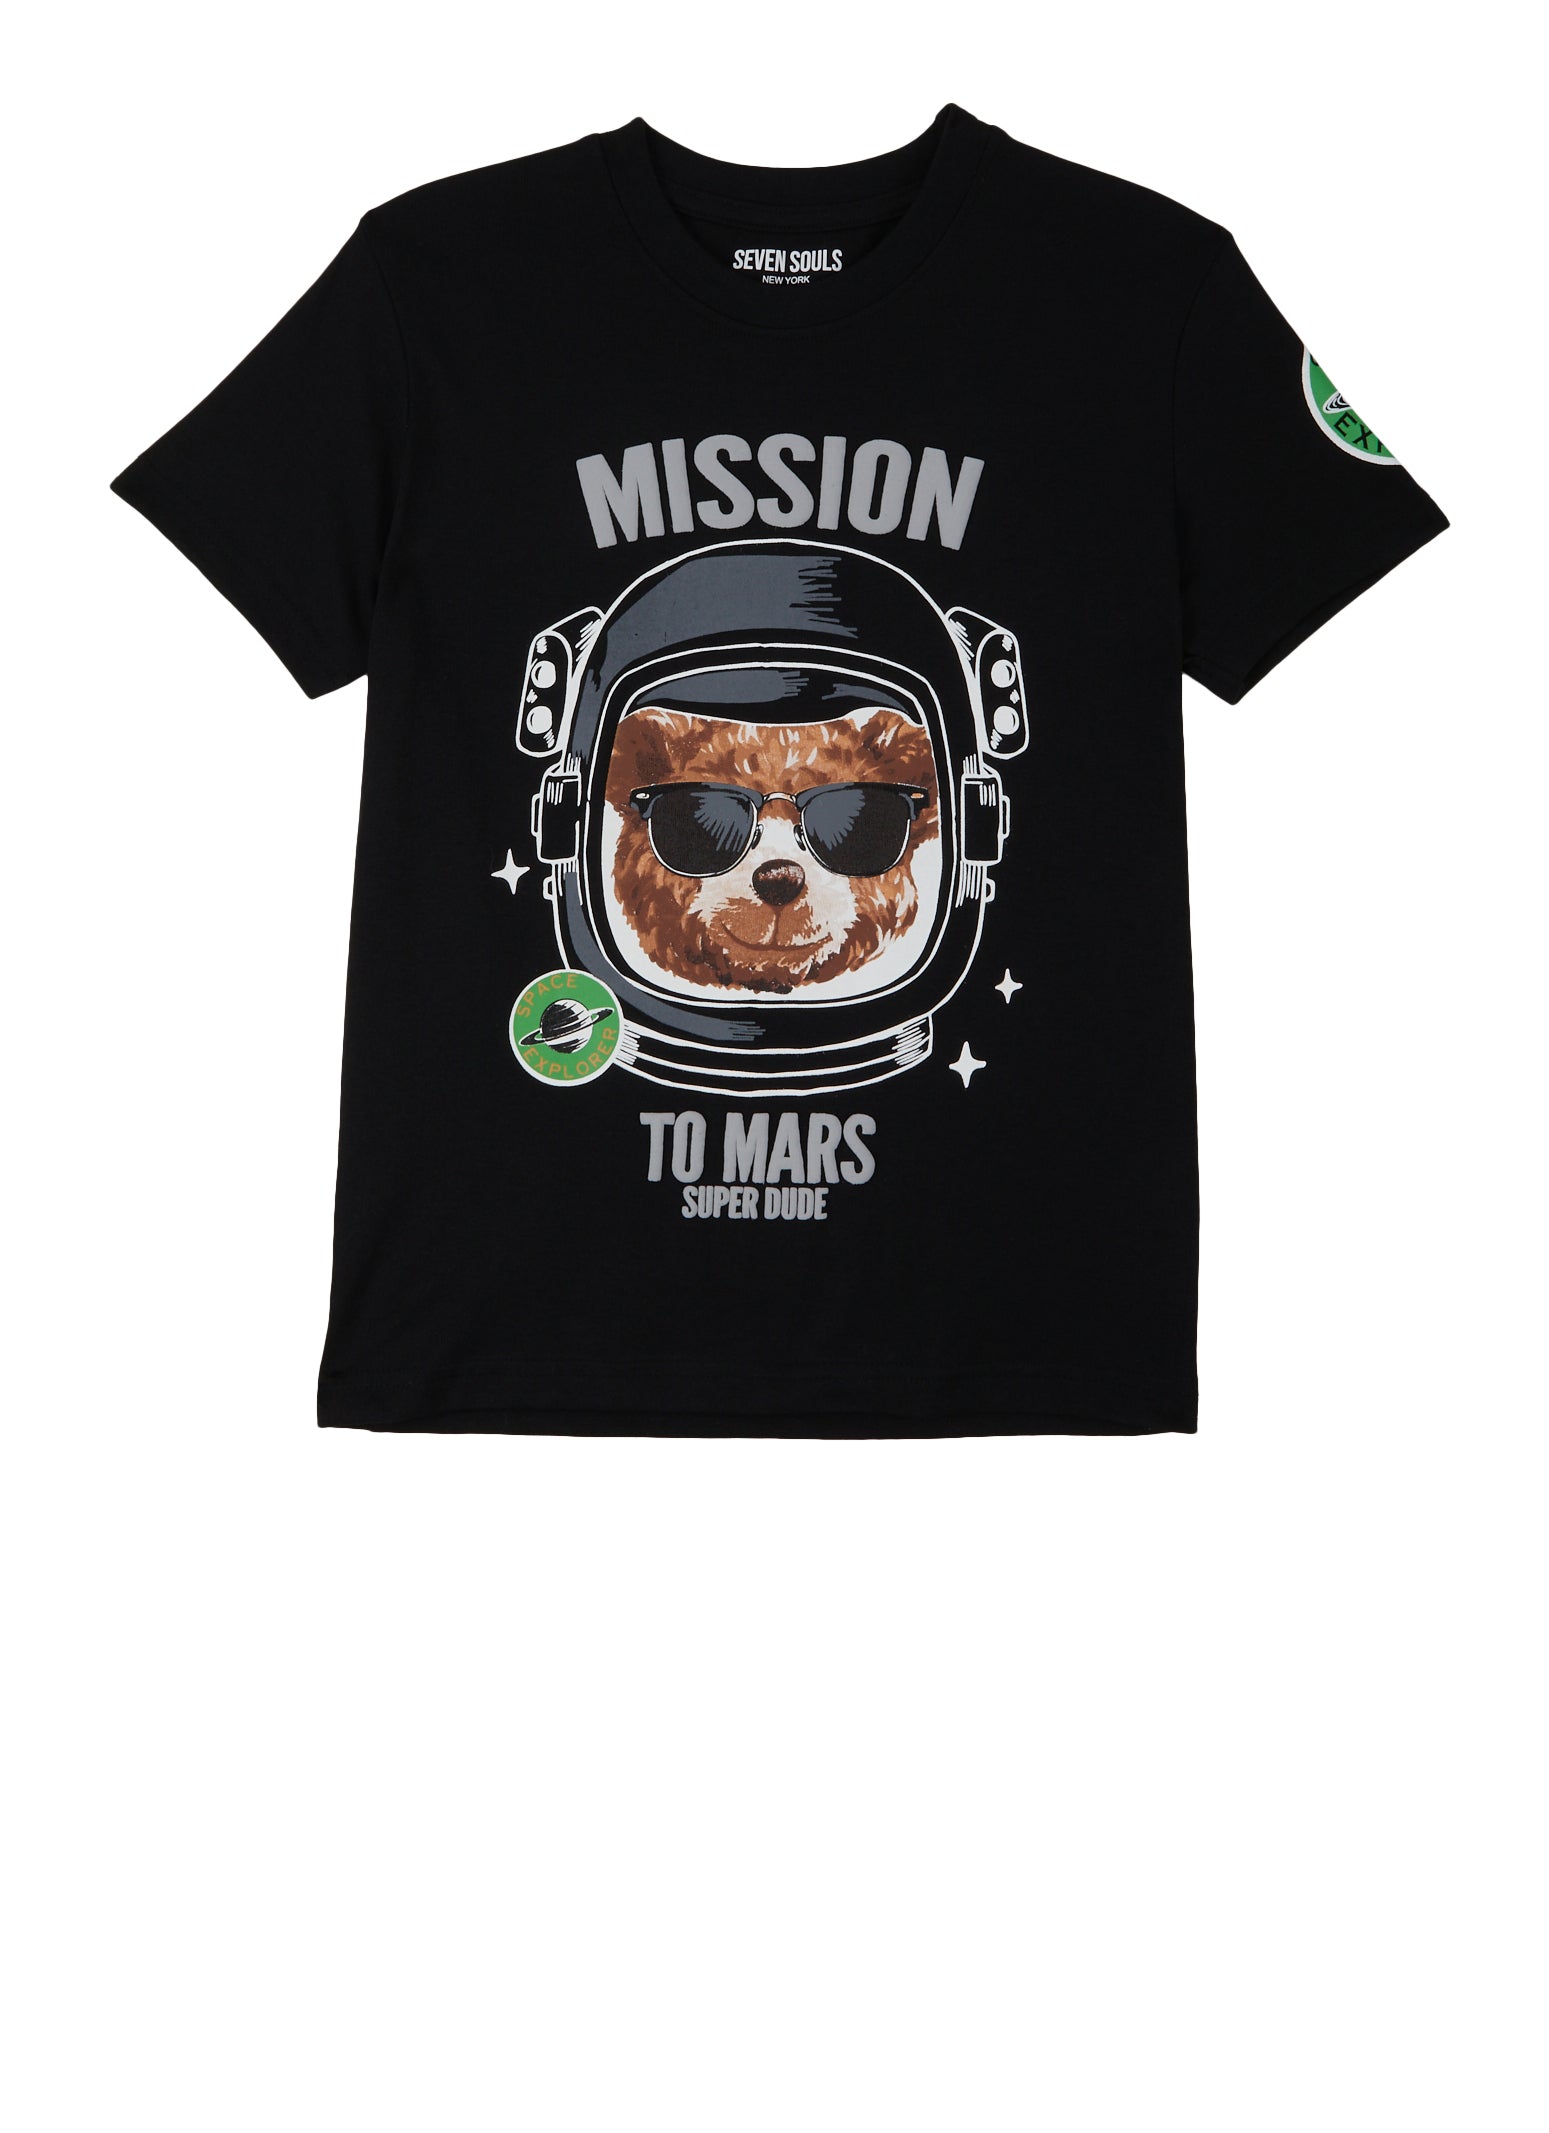 Boys Mission To Mars Graphic Tee, Black, Size 18